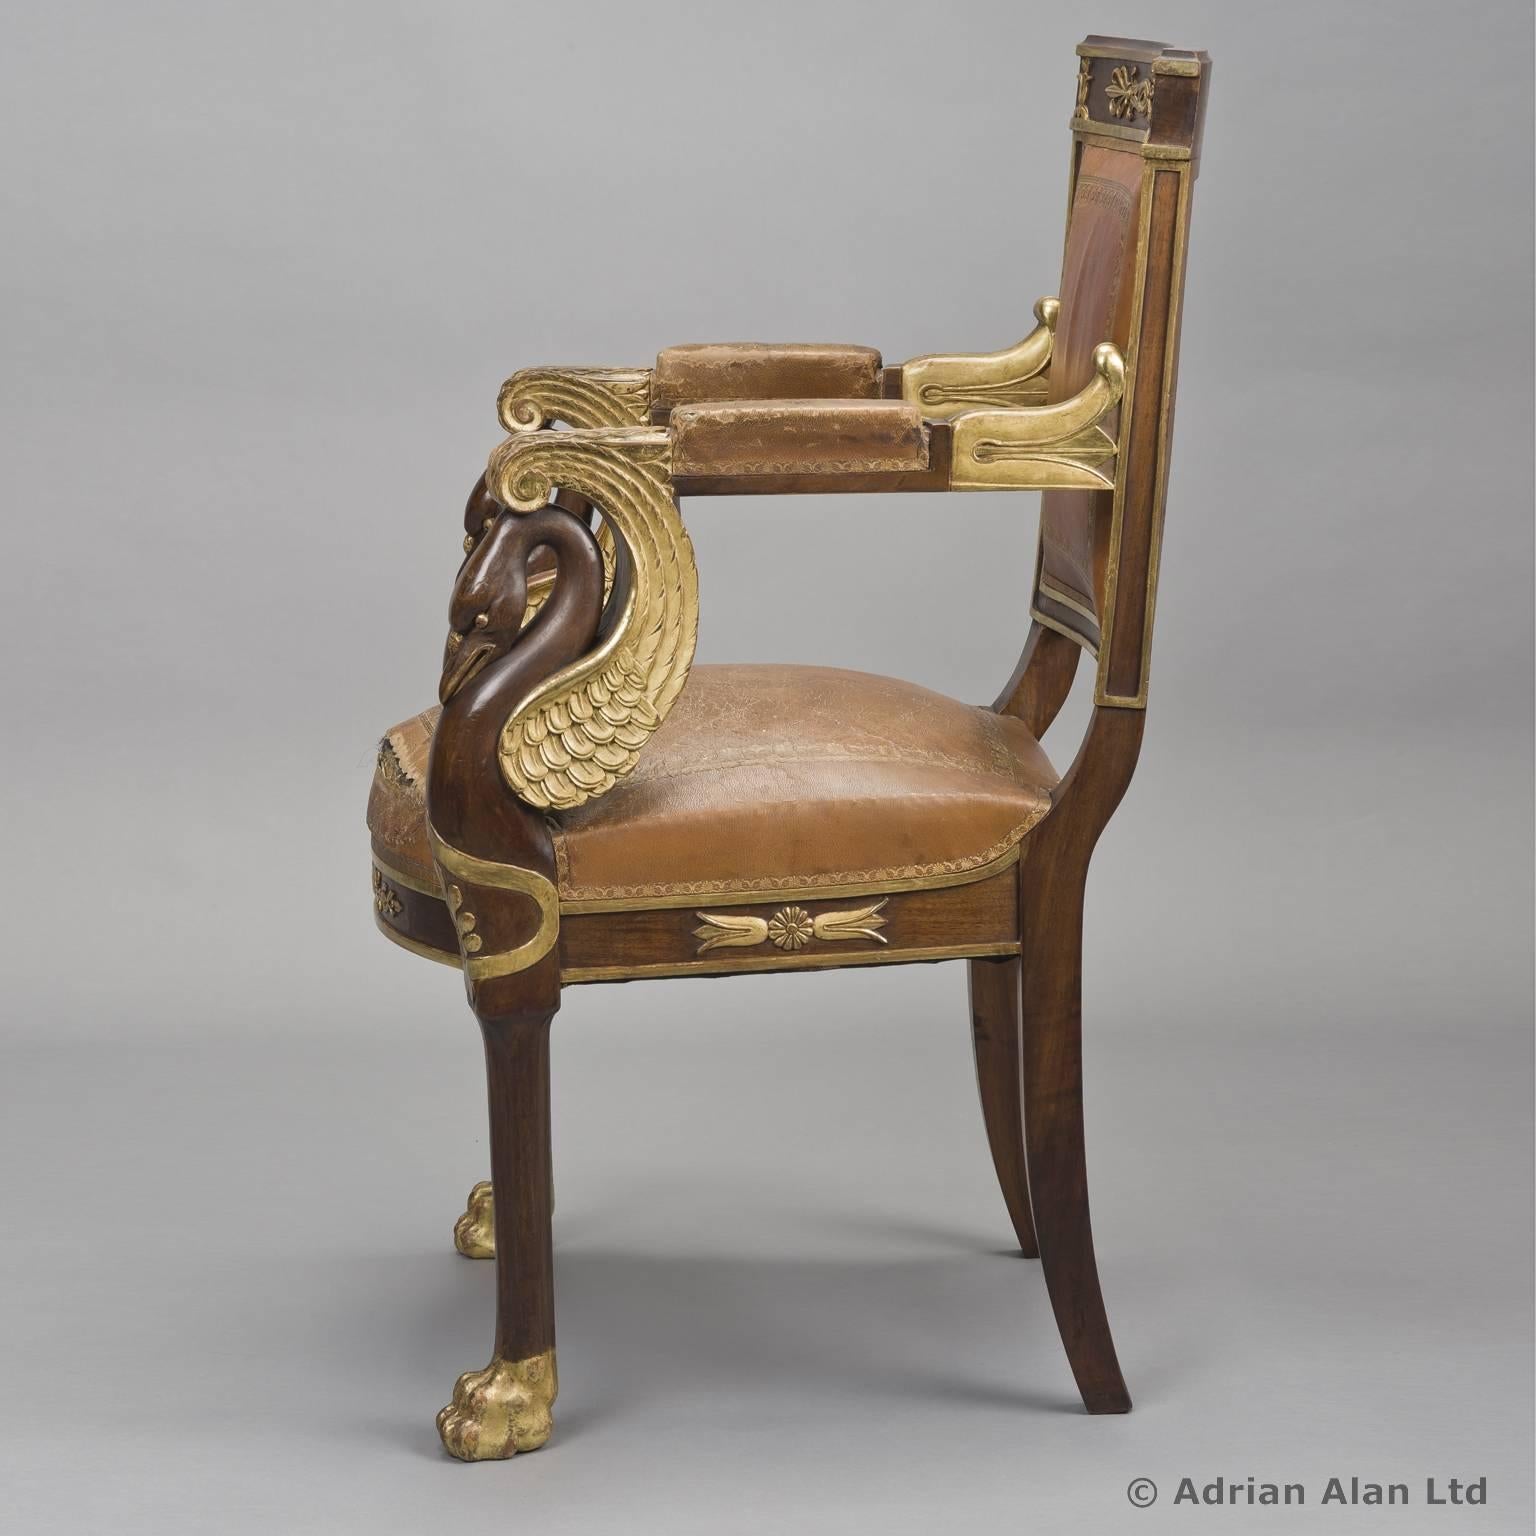 An Empire style mahogany parcel-gilt fauteuil.

The rectangular back with a rosette, foliate and anthemion carved top rail, lotus and foliate scrolled arms with swan neck supports and a bowed seat, upholstered throughout in gilt-tooled tan